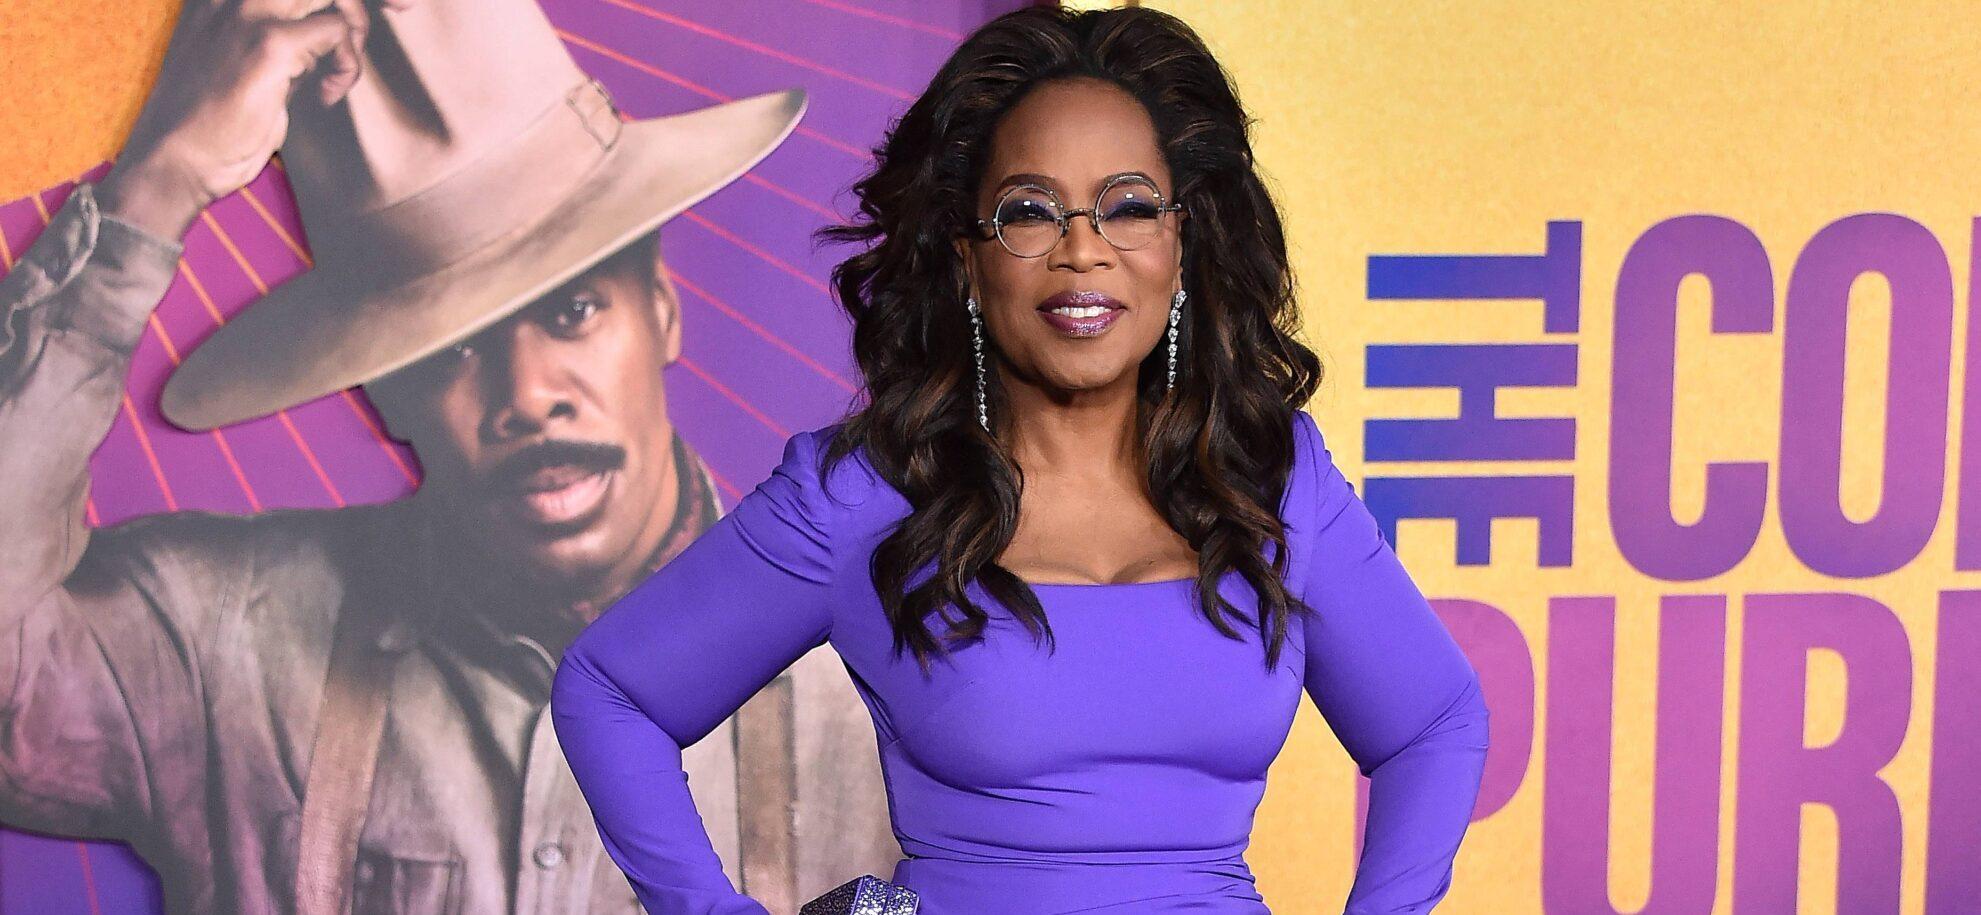 Oprah Winfrey Finally Admits Using Weight Loss Drug For This Reason After Denying Ozempic Rumors